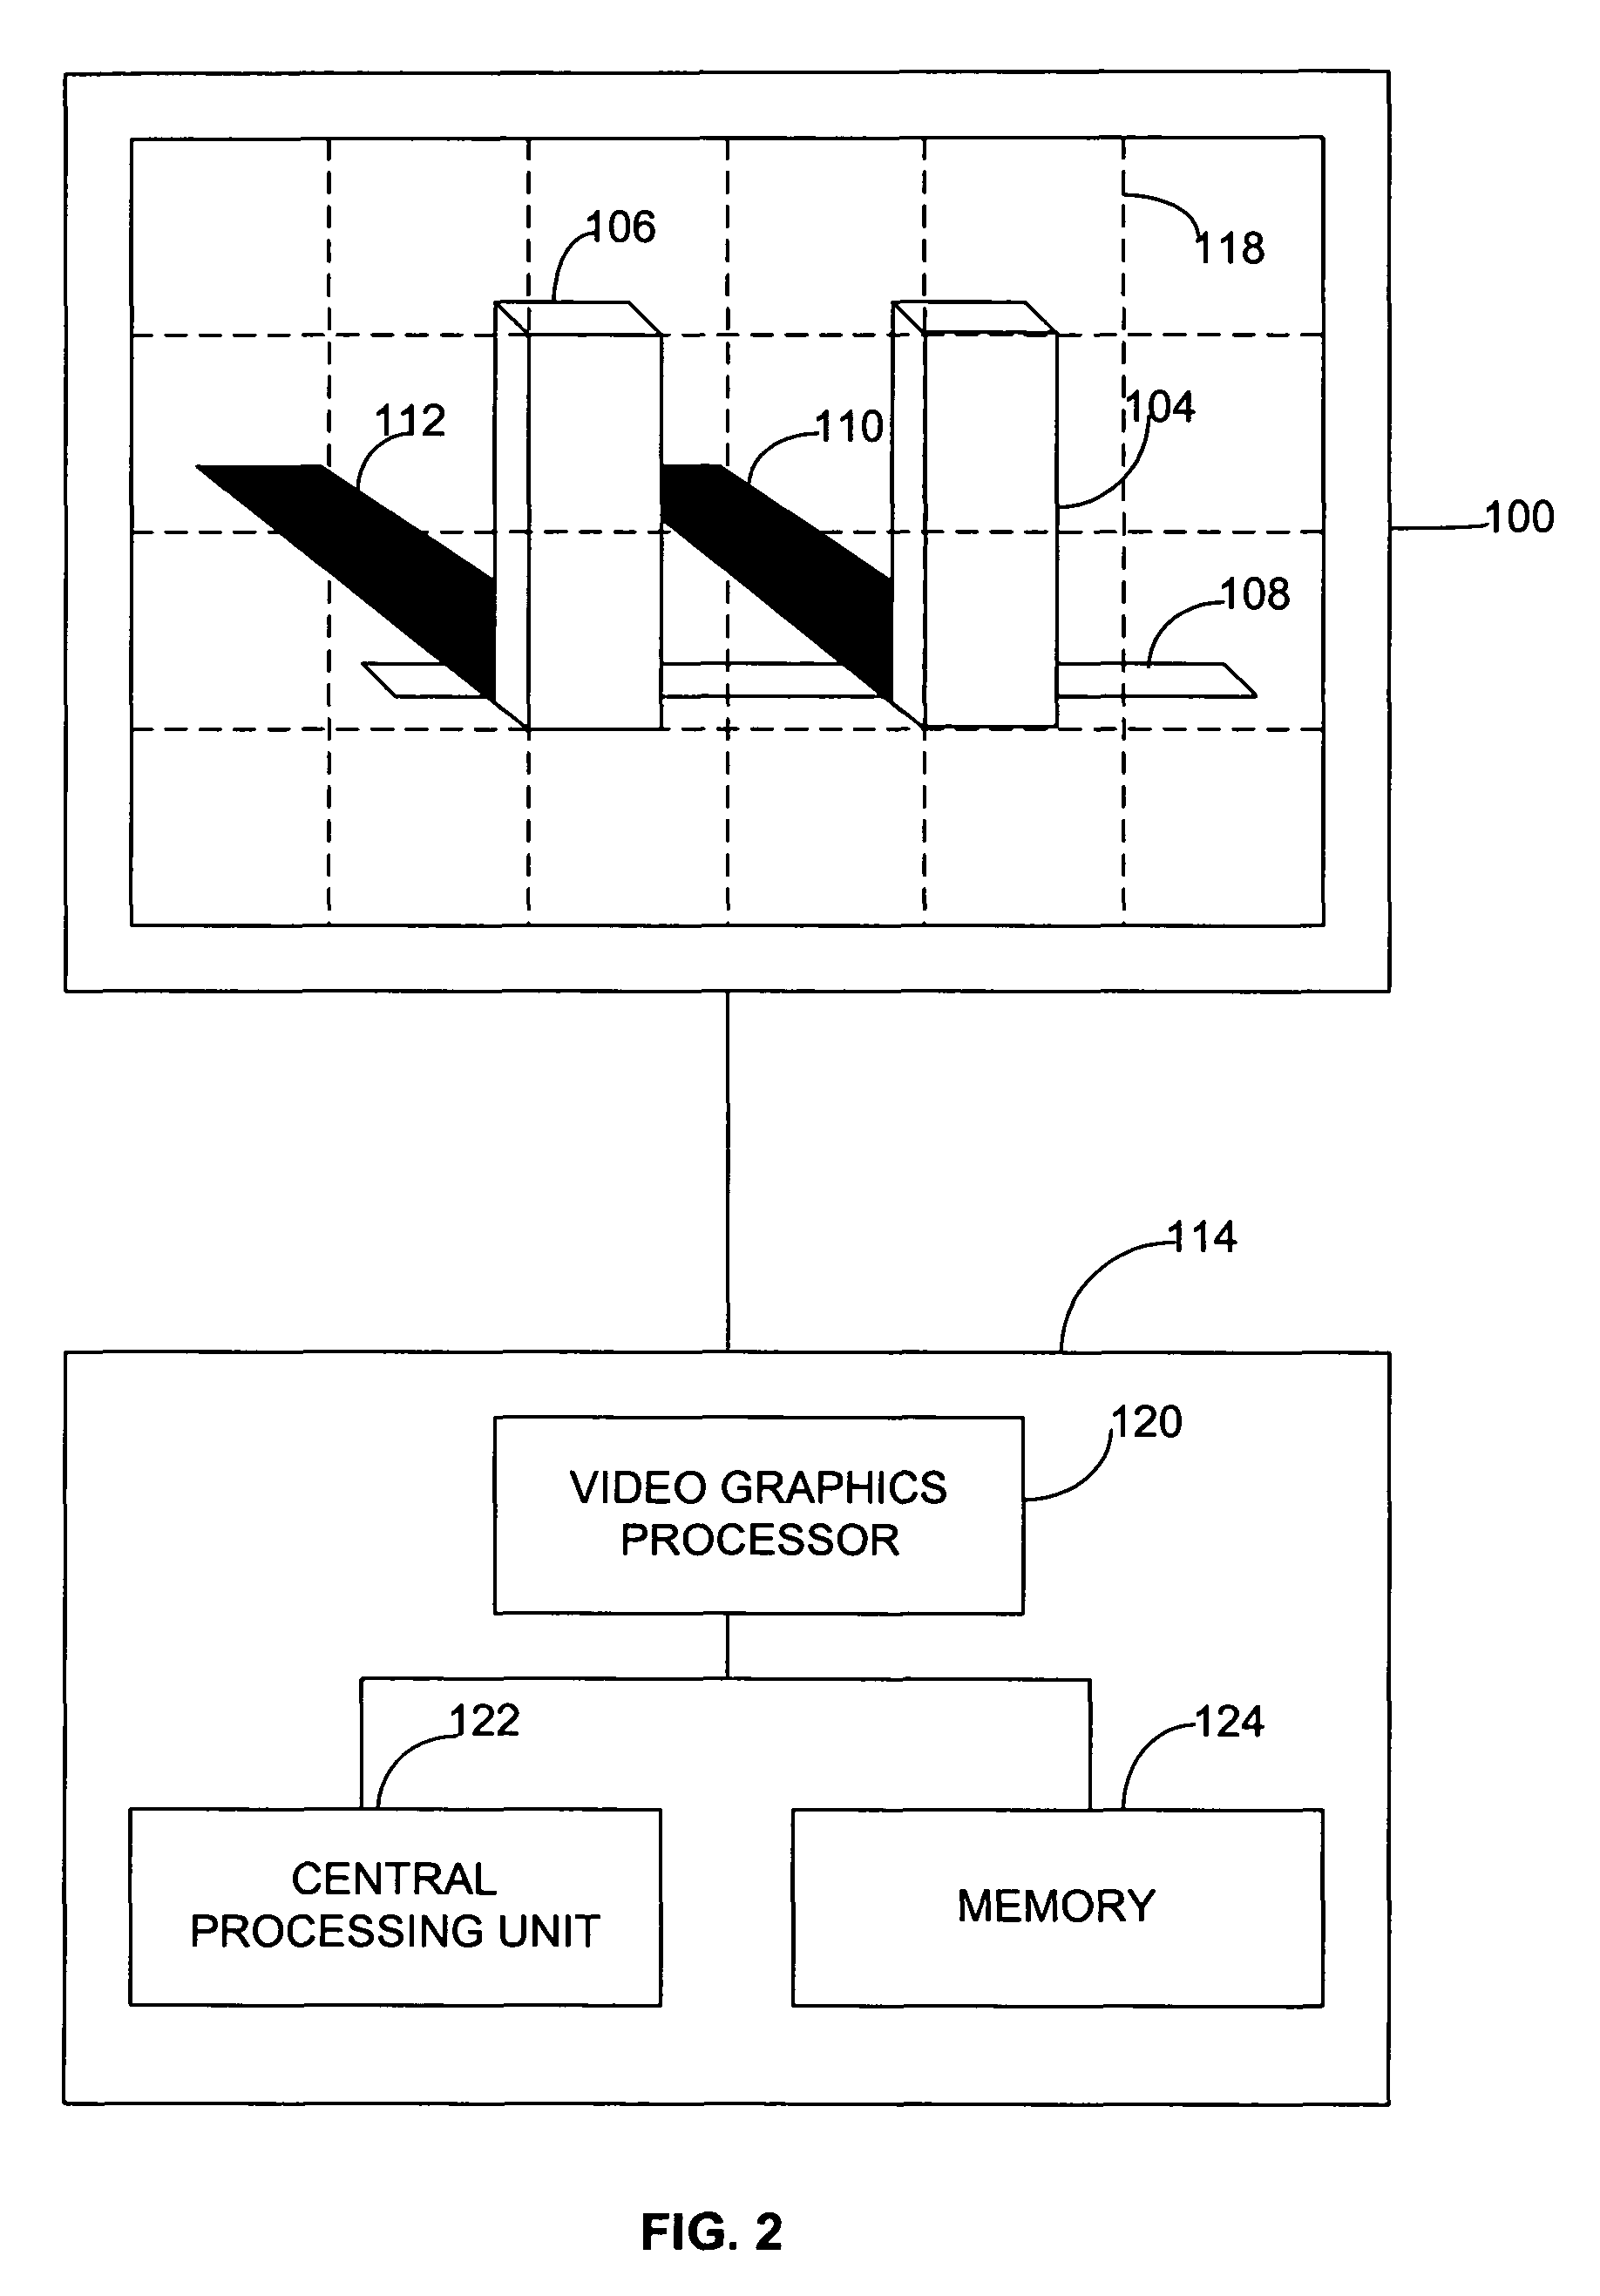 Method and apparatus for hierarchical Z buffering and stenciling